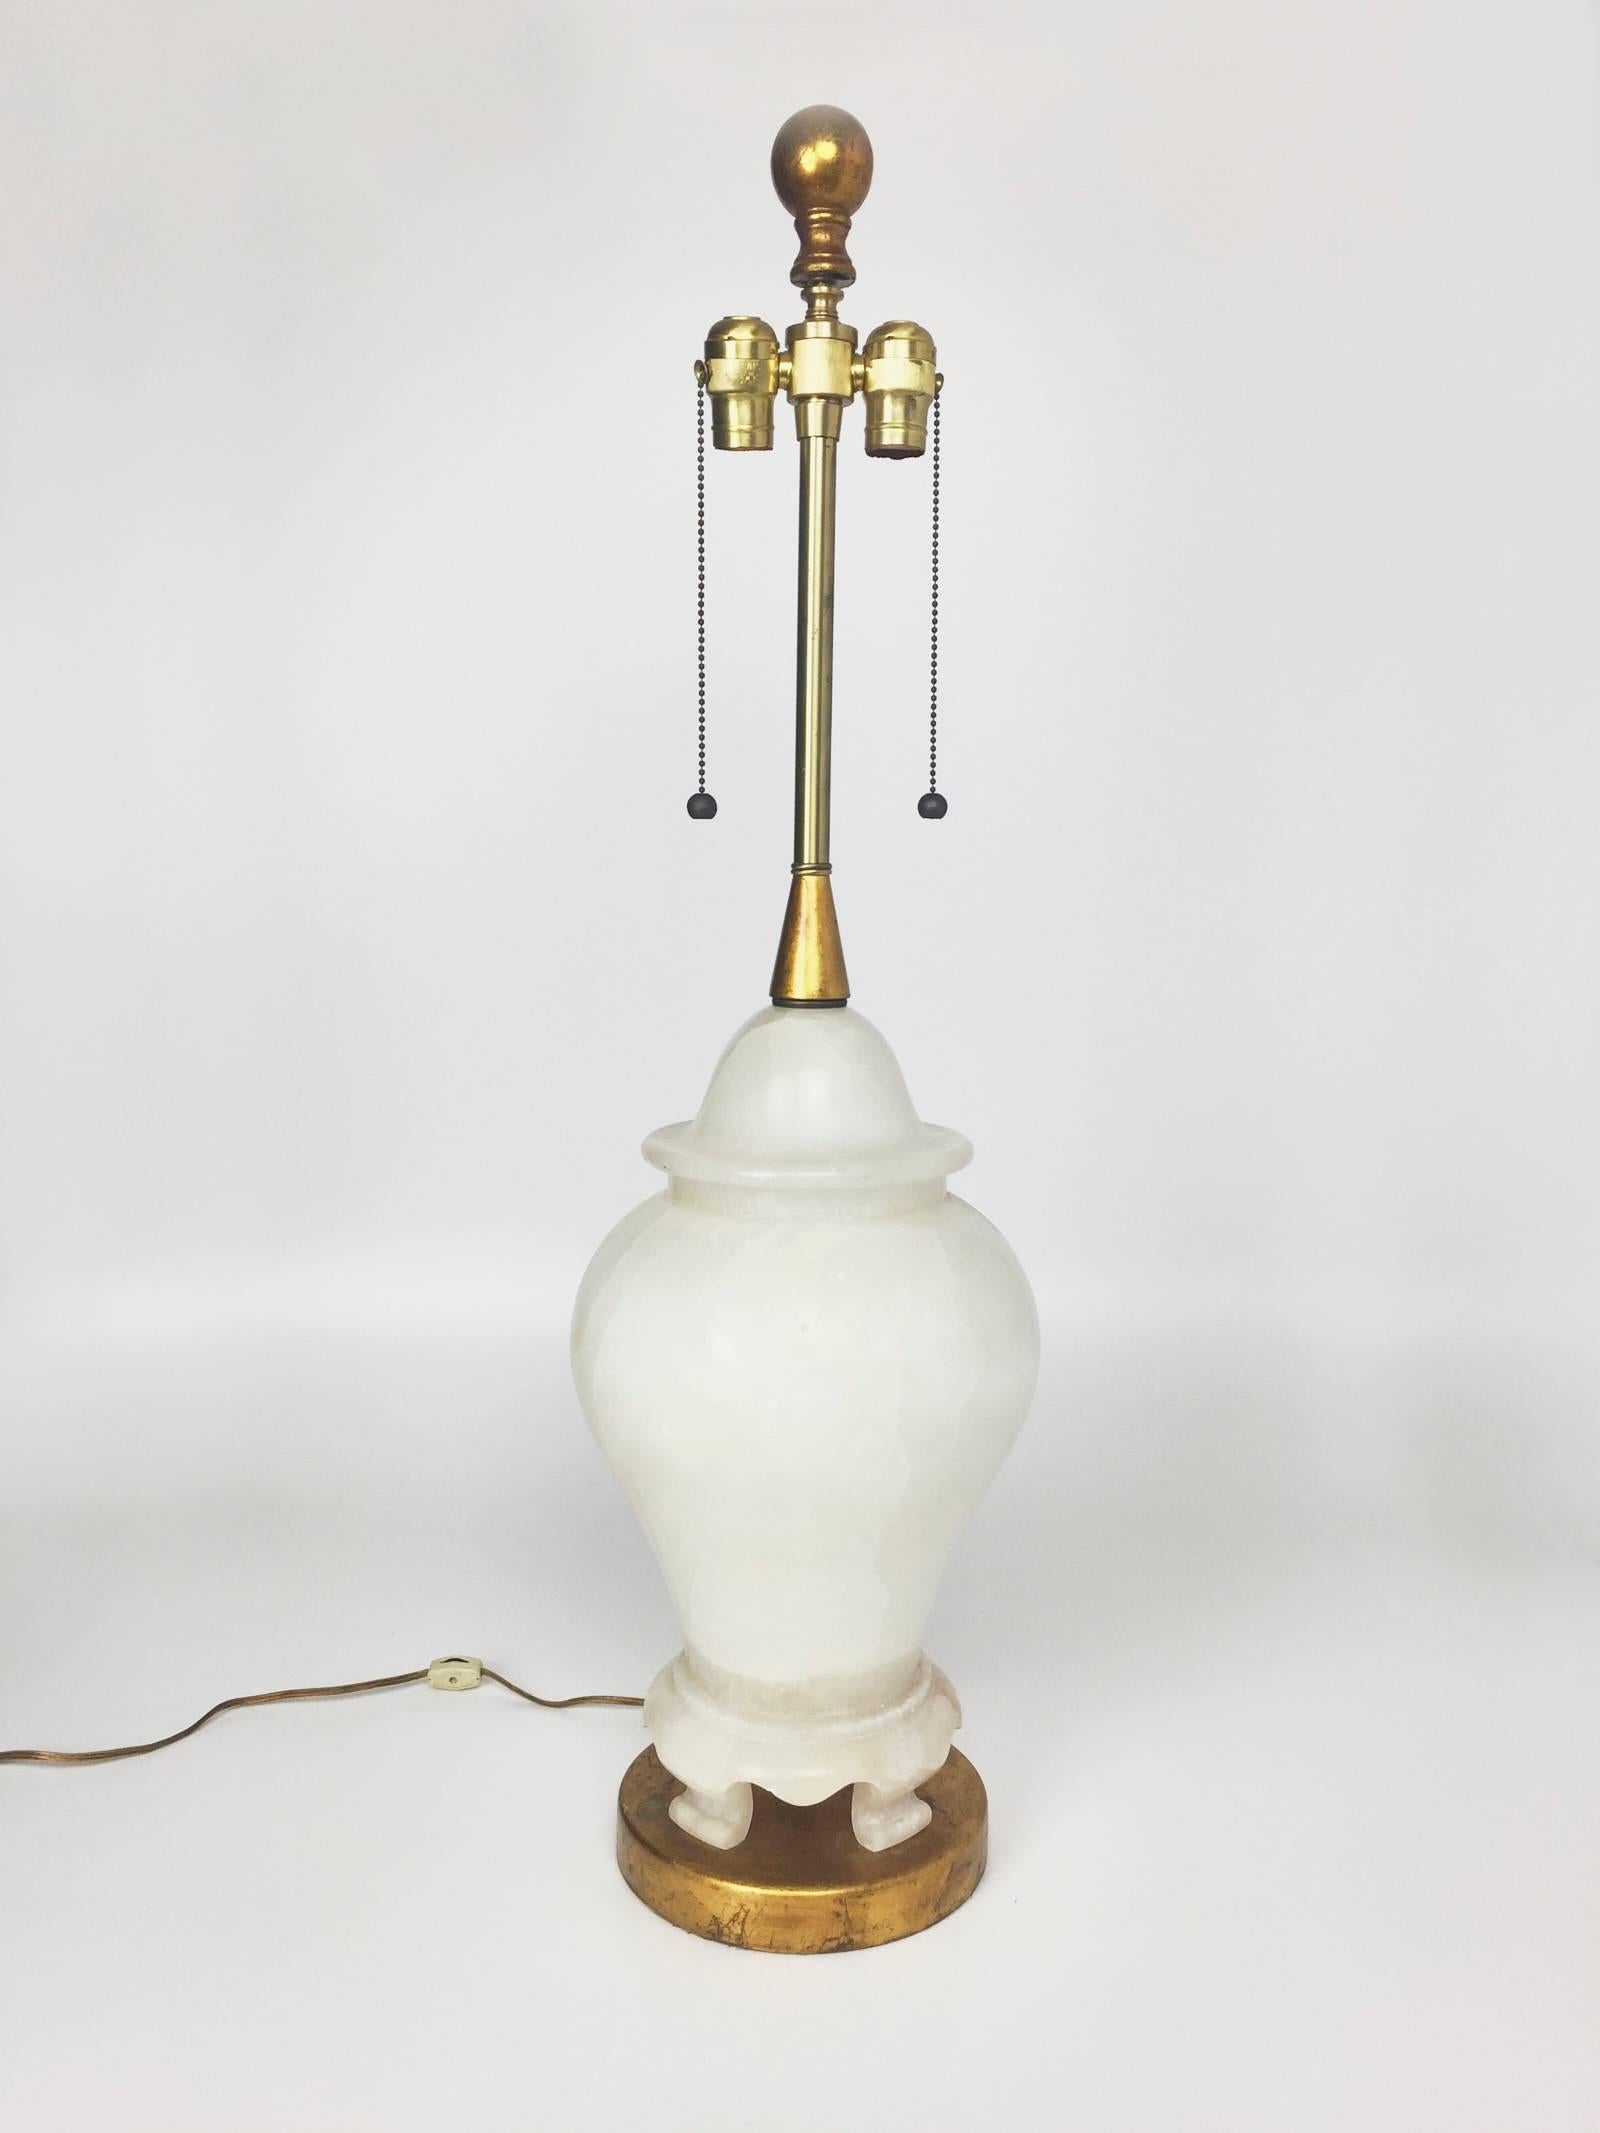 Oversized Mid-Century Modern carved alabaster table lamp in footed urn form, set atop a giltwood base by The Marbro Lamp Company. Double fitting for two bulbs. Matching gilt finial. Brass detailing. Alabaster element likely sourced from